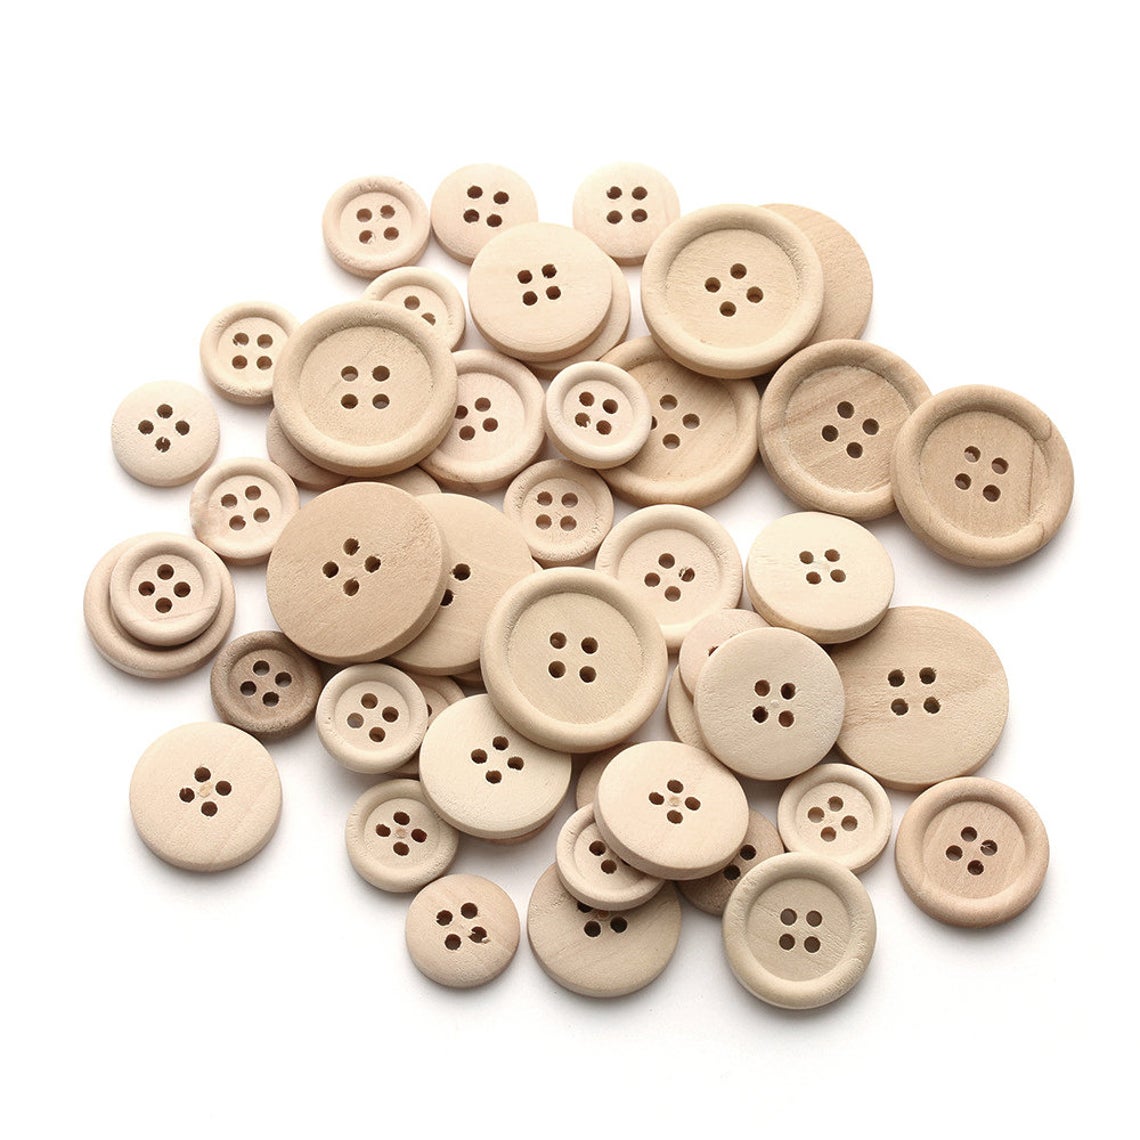 12 Natural unfinished wood buttons 15, 20 or 25mm